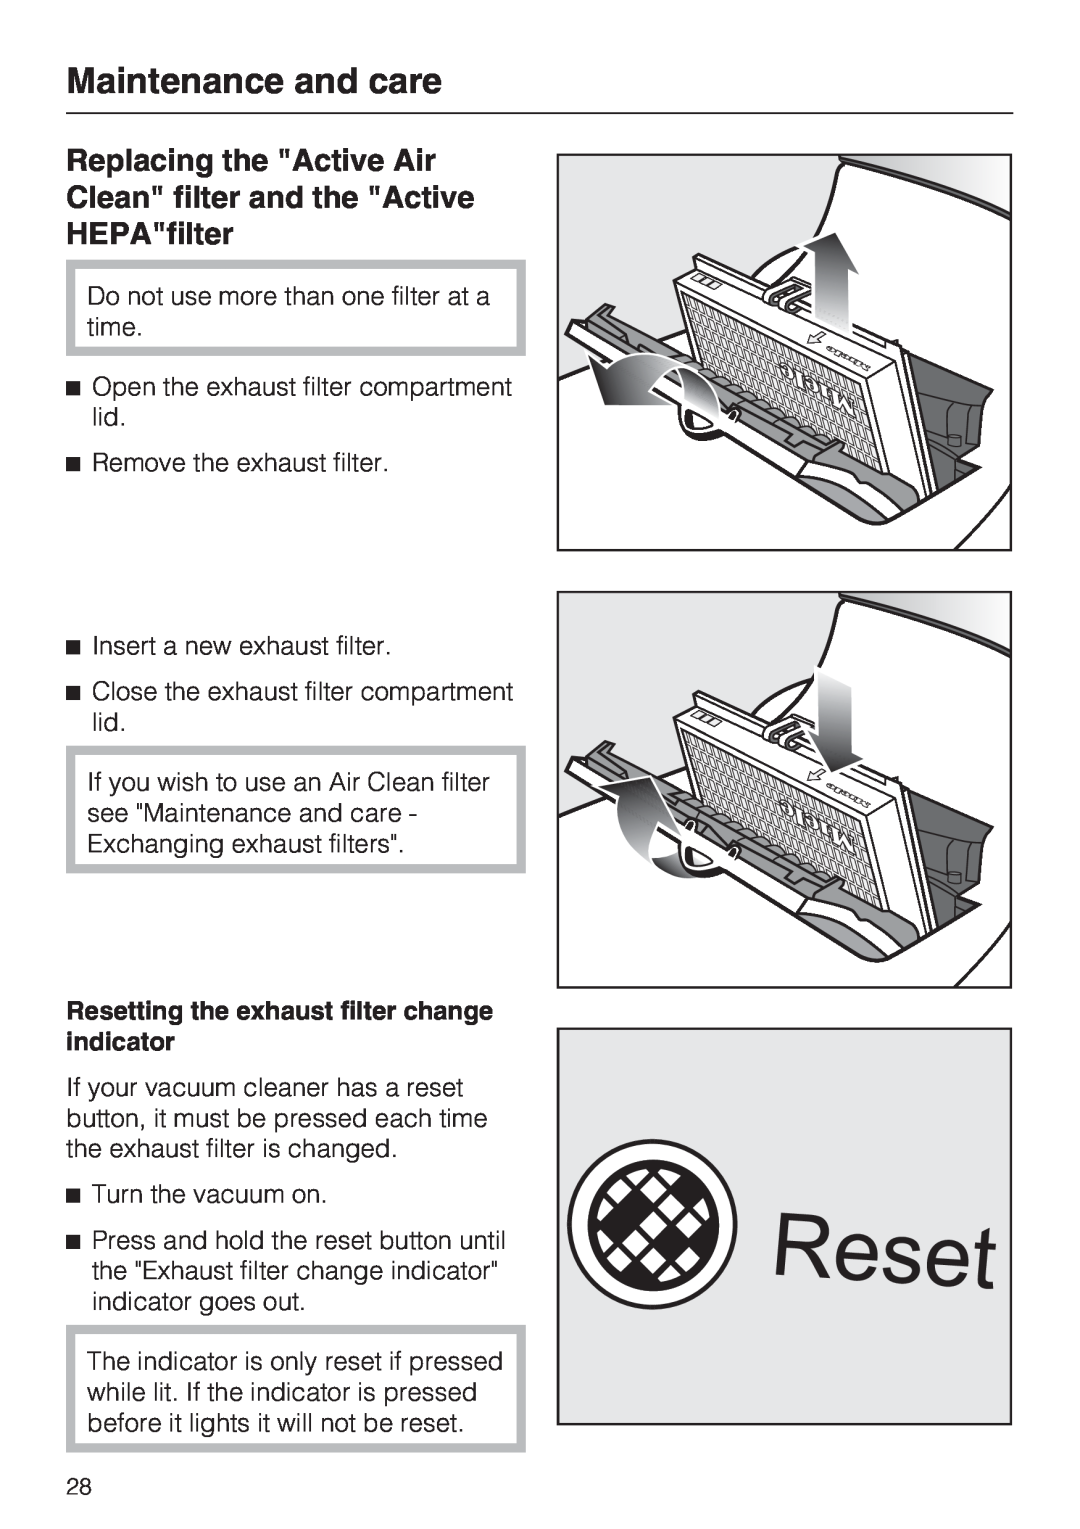 Miele S 7000 operating instructions Resetting the exhaust filter change indicator, Maintenance and care 